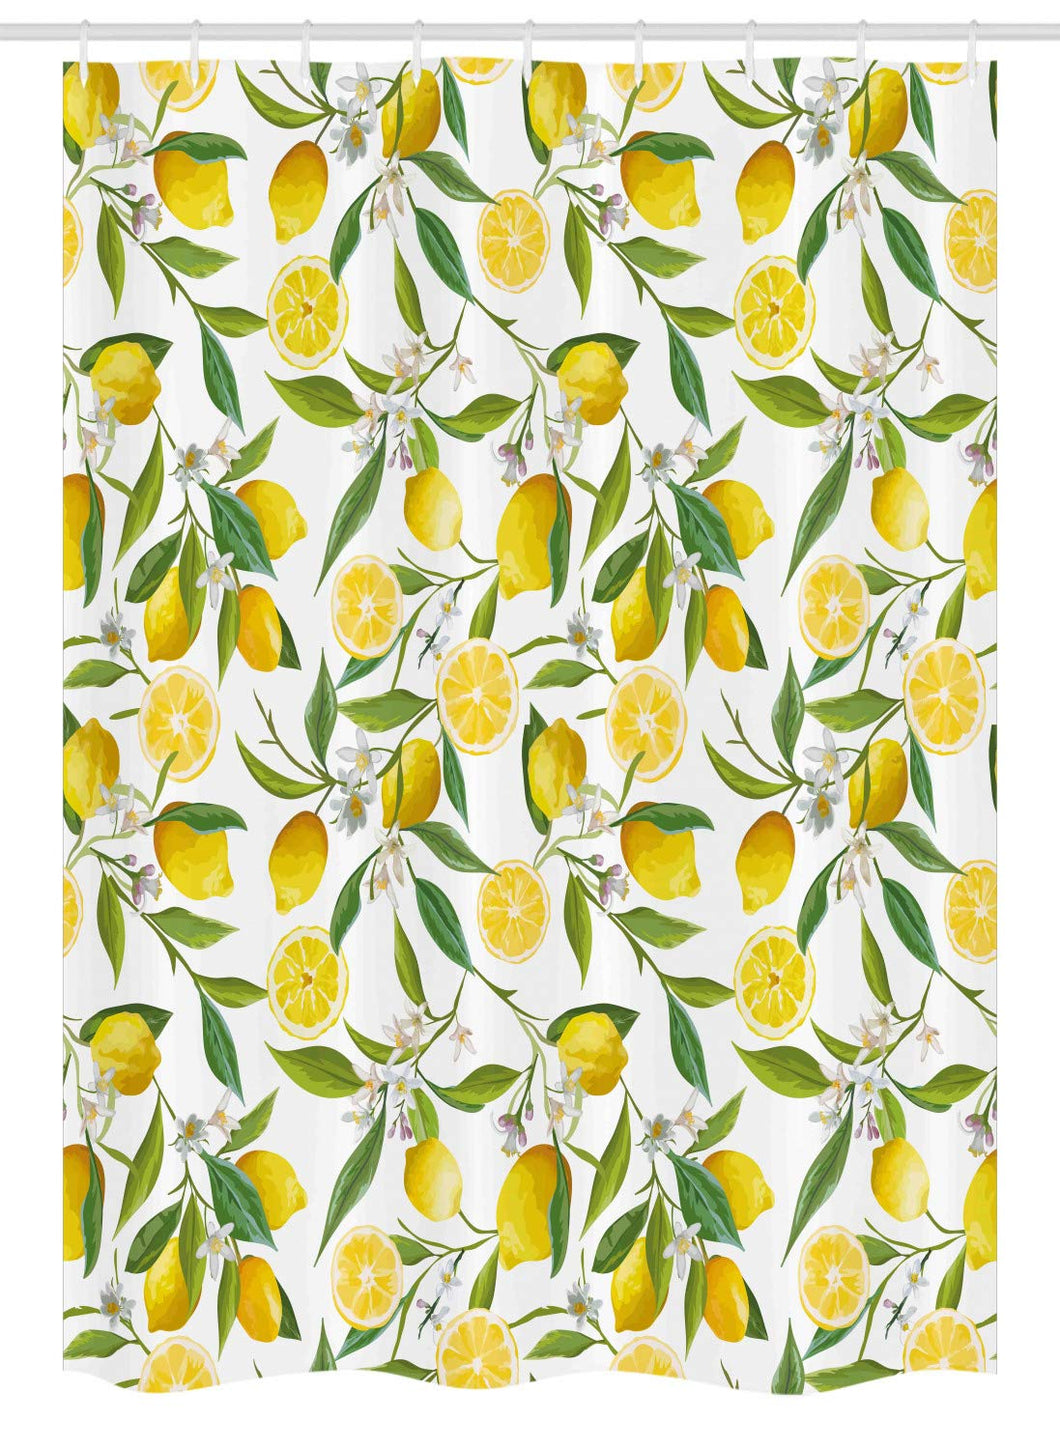 Ambesonne Nature Stall Shower Curtain, Exotic Lemon Tree Branches Yummy Delicious Kitchen Gardening Design, Fabric Bathroom Decor Set with Hooks, 54